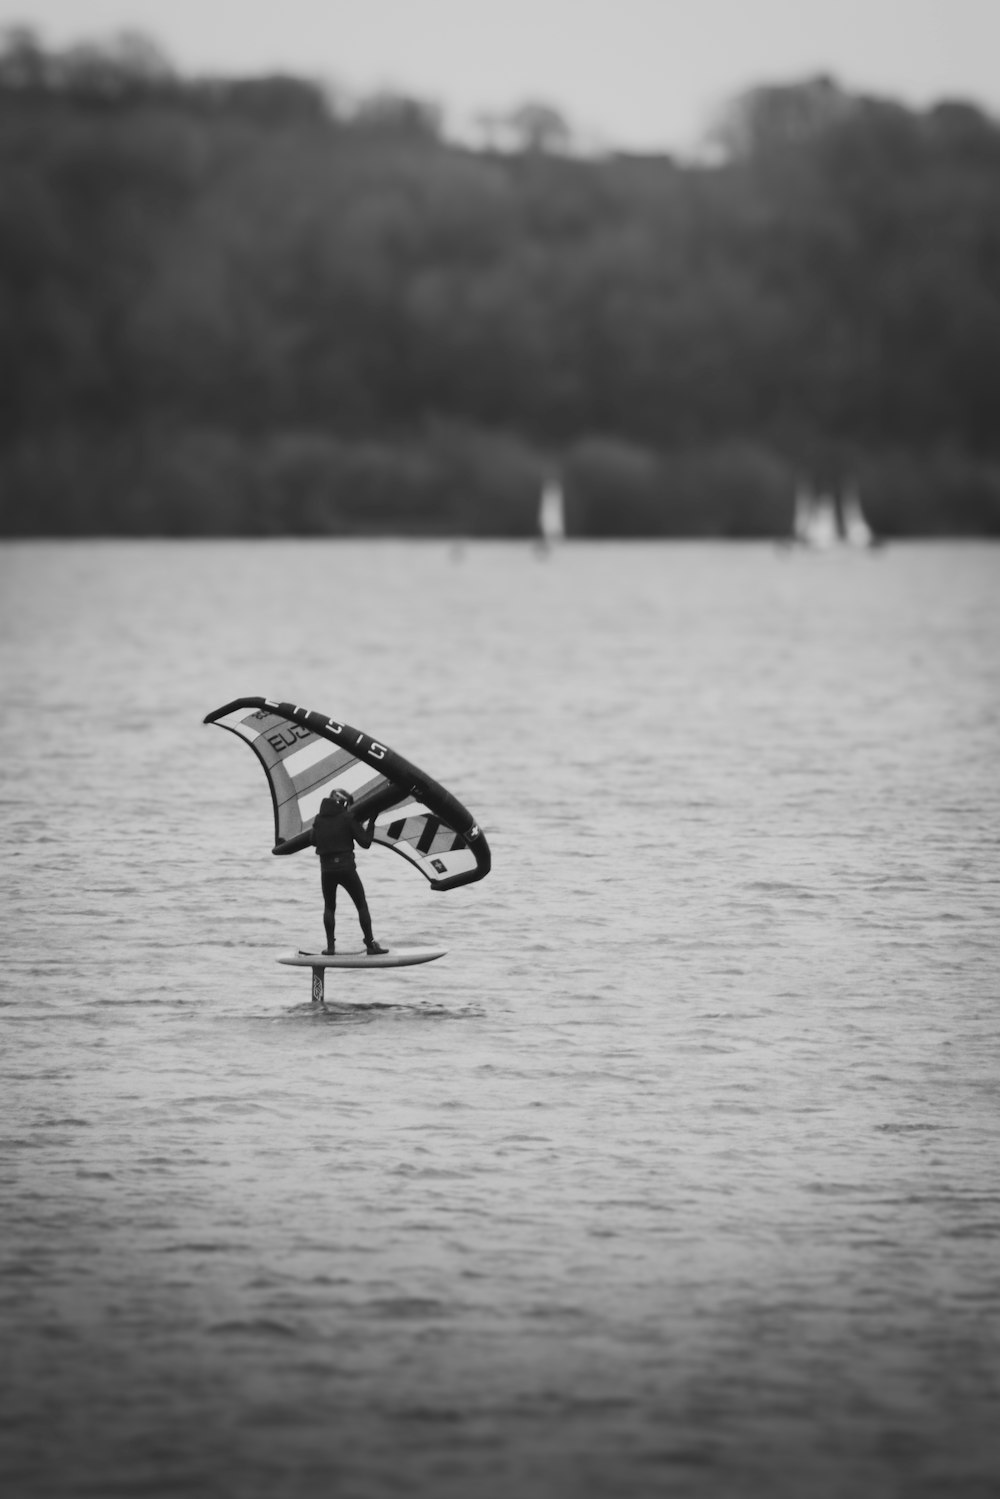 a person on a surfboard with a para sail